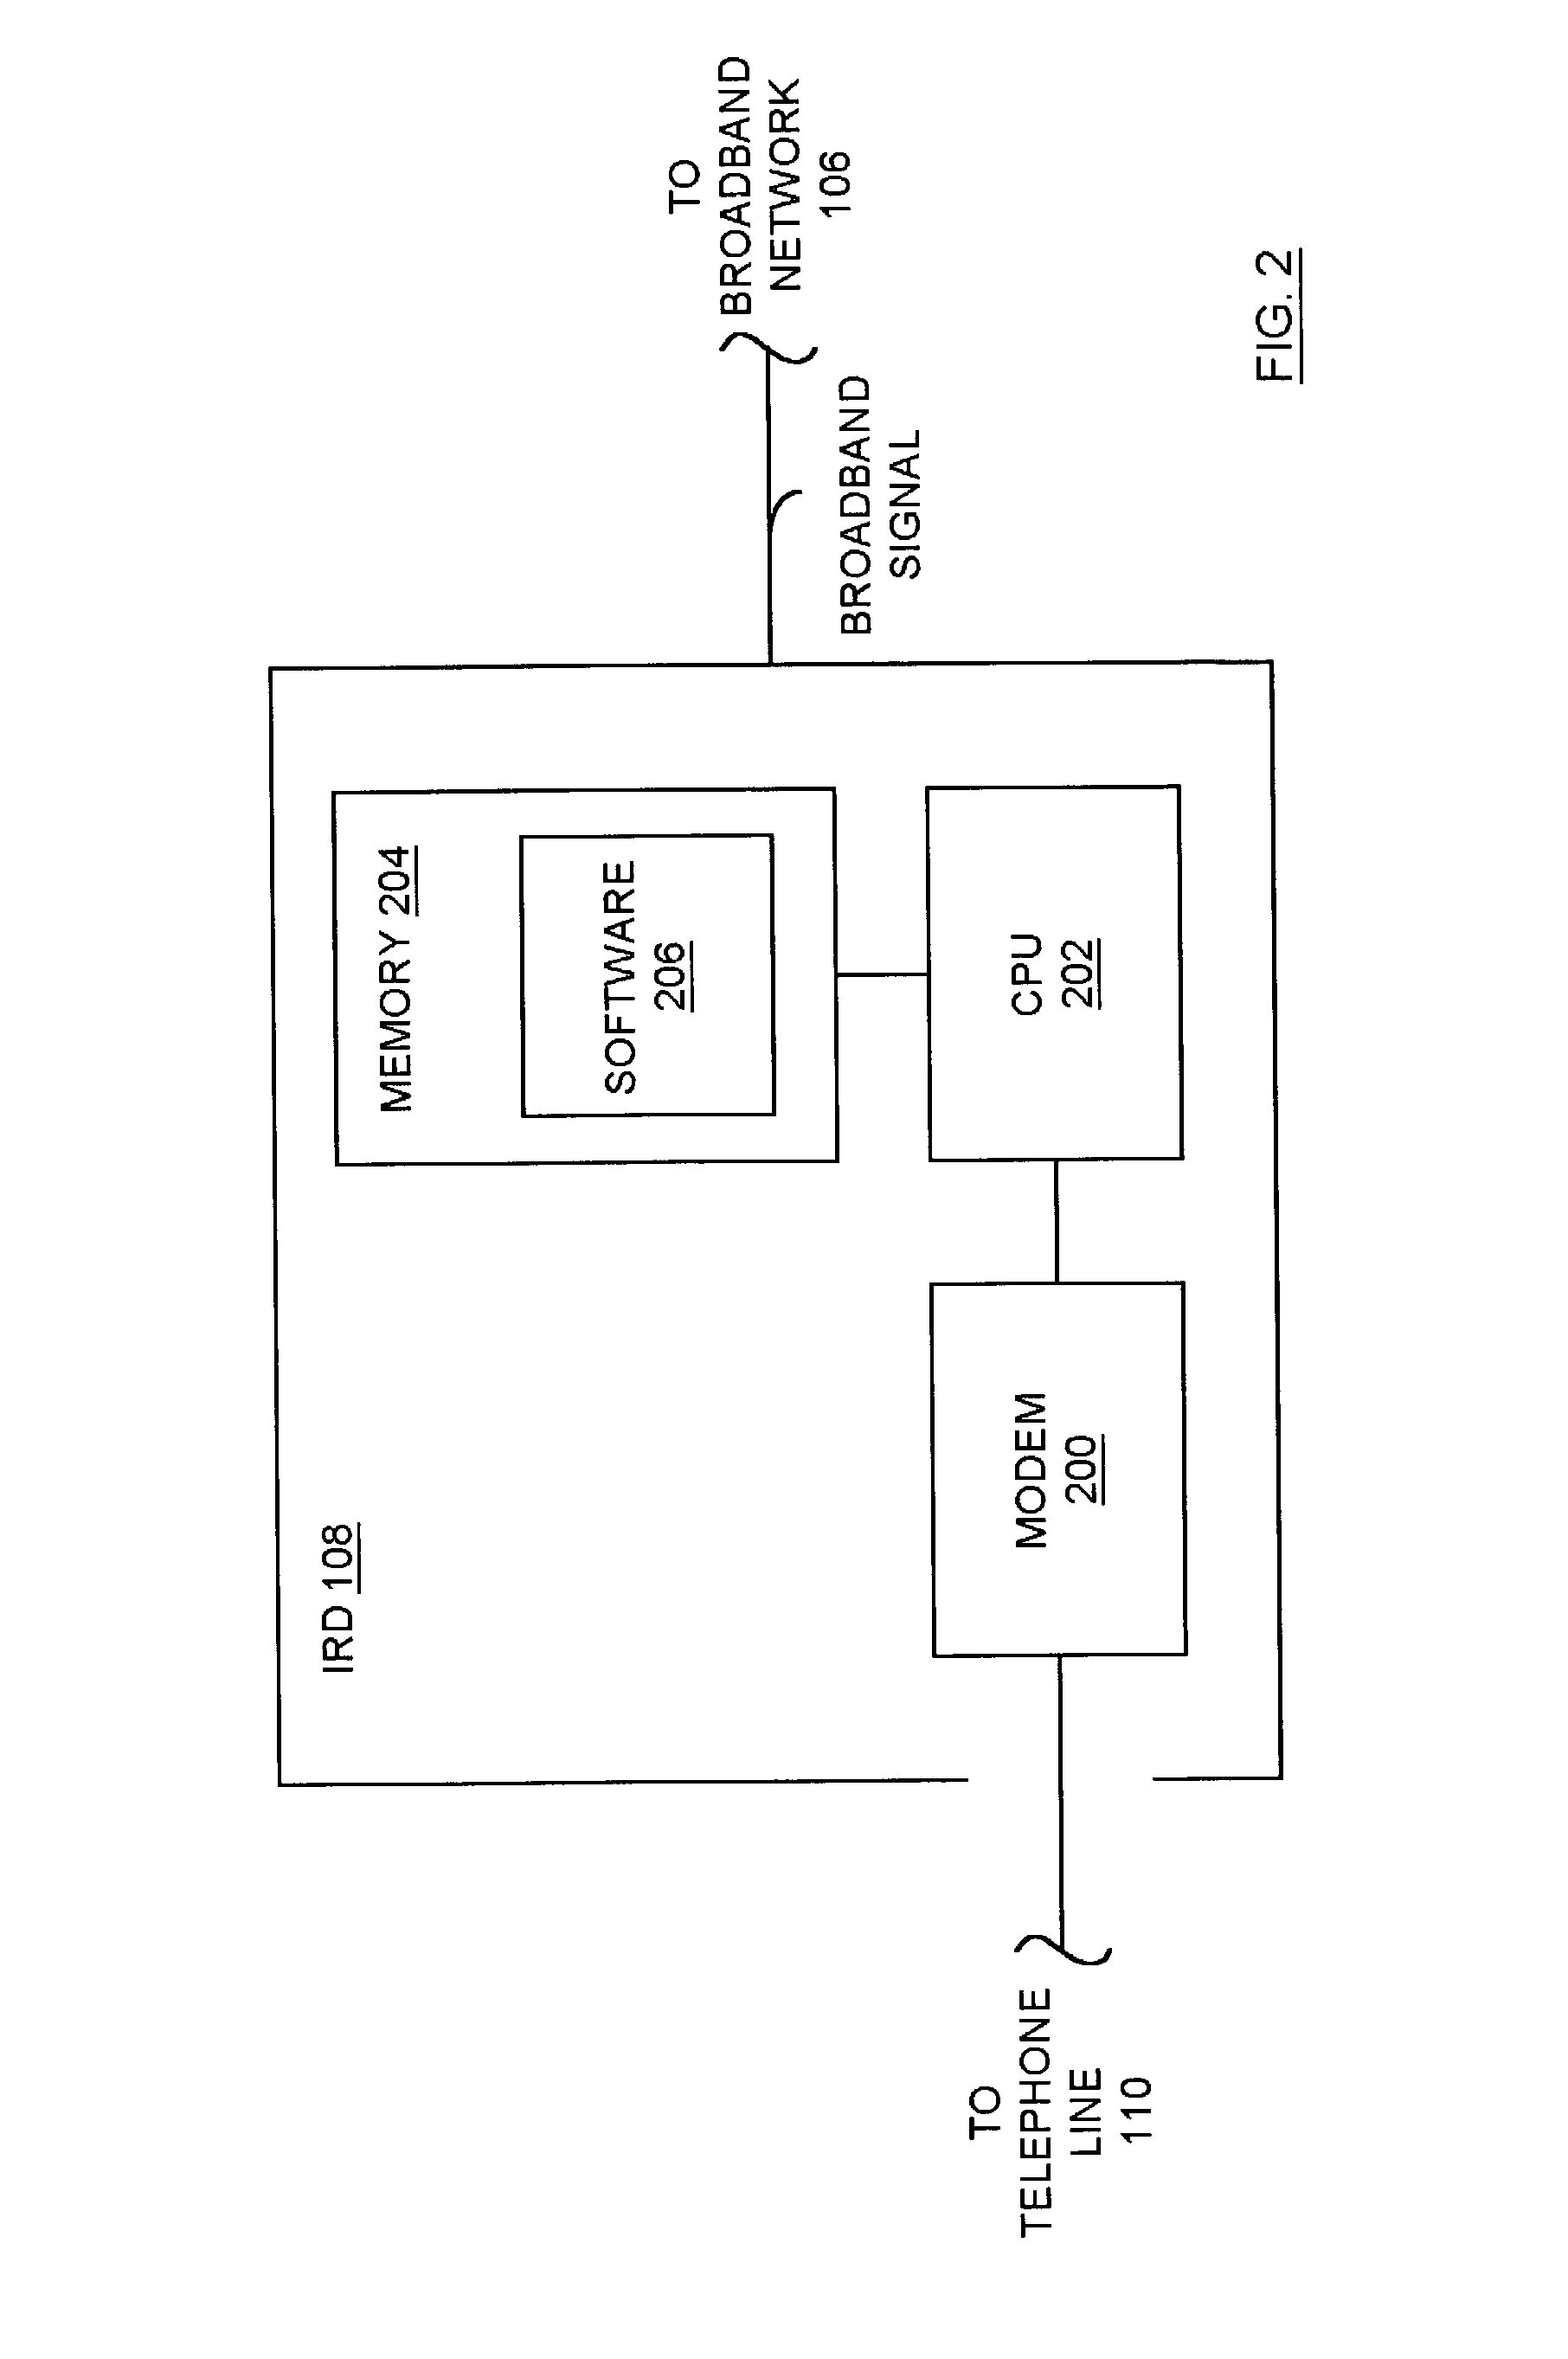 Detection and authentication of multiple integrated receiver decoders (IRDs) within a subscriber dwelling